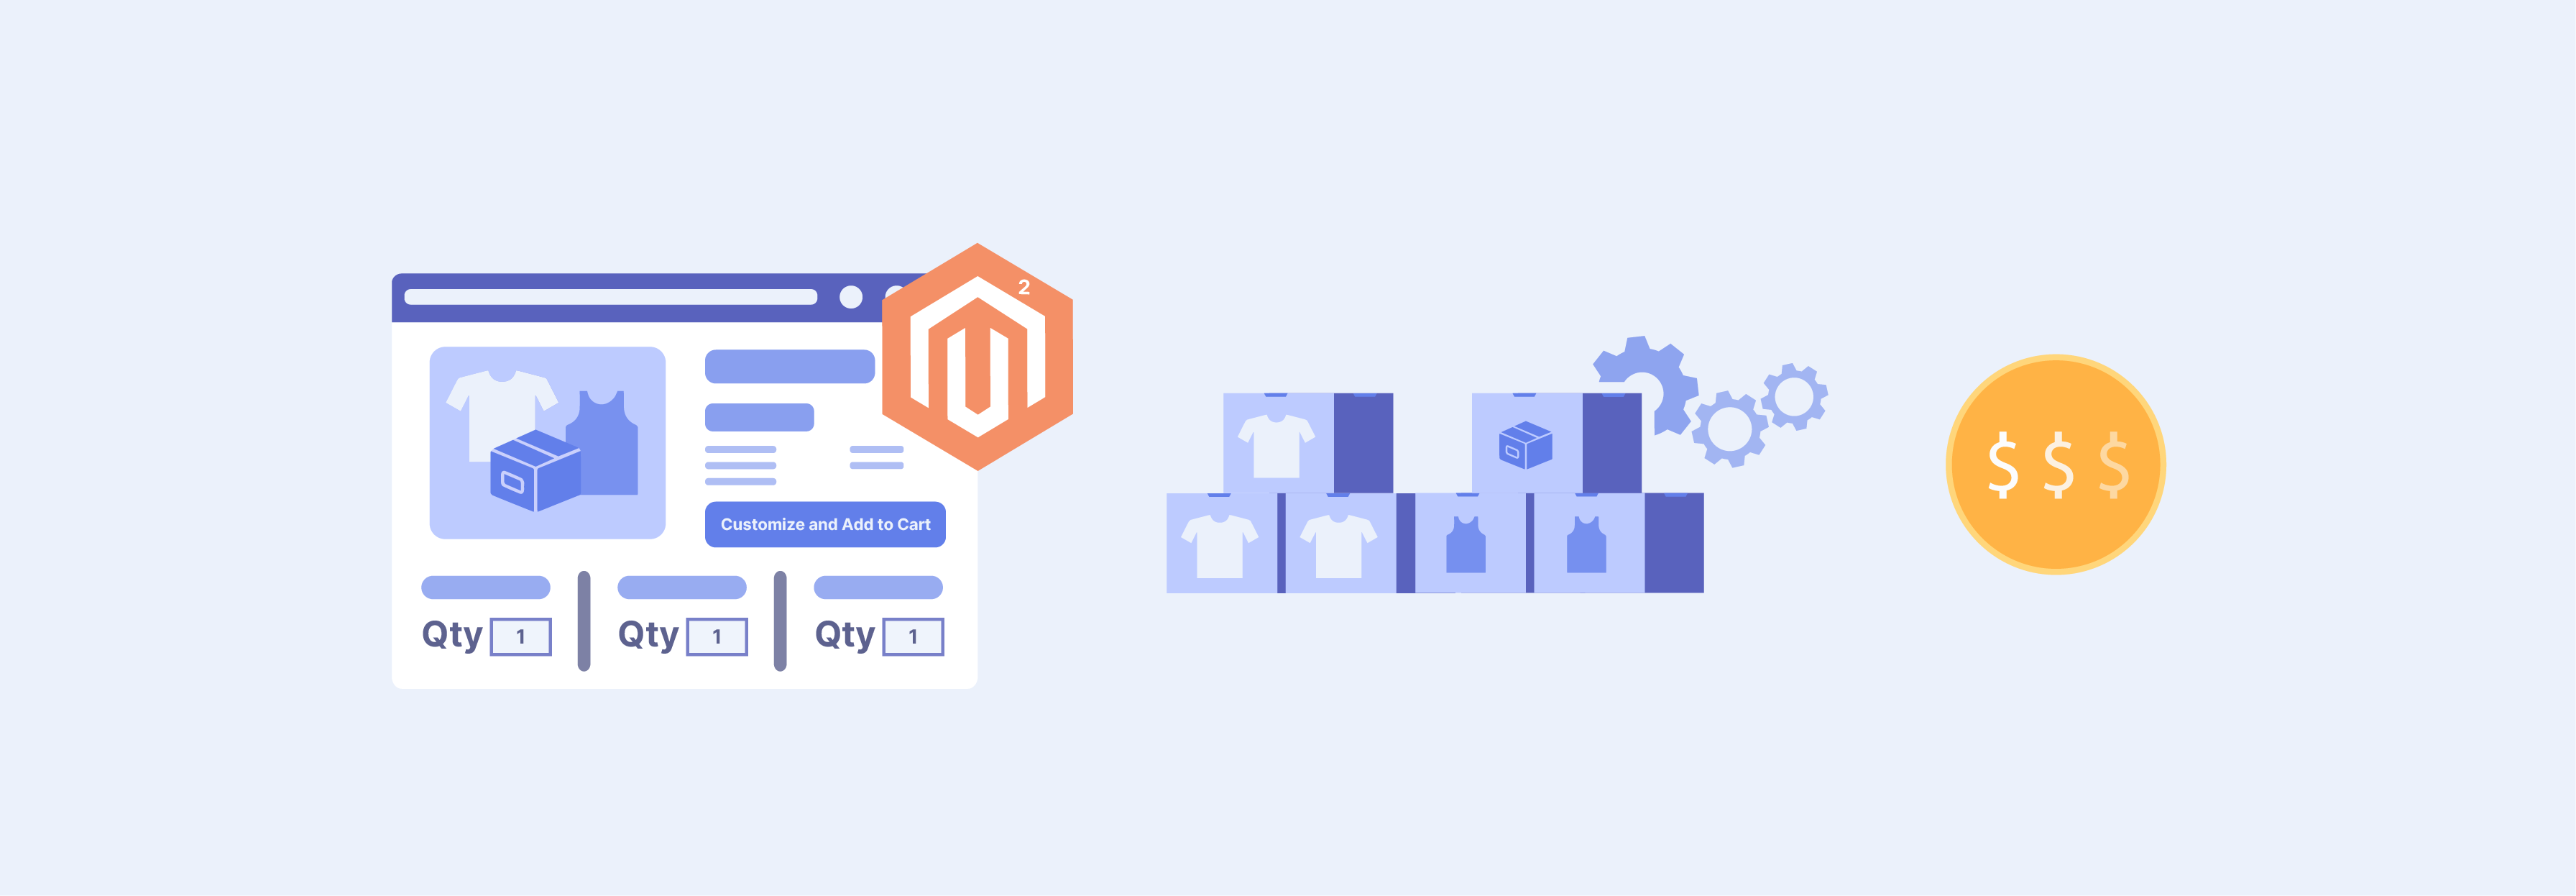 What is the Magento 2 Bundle Product